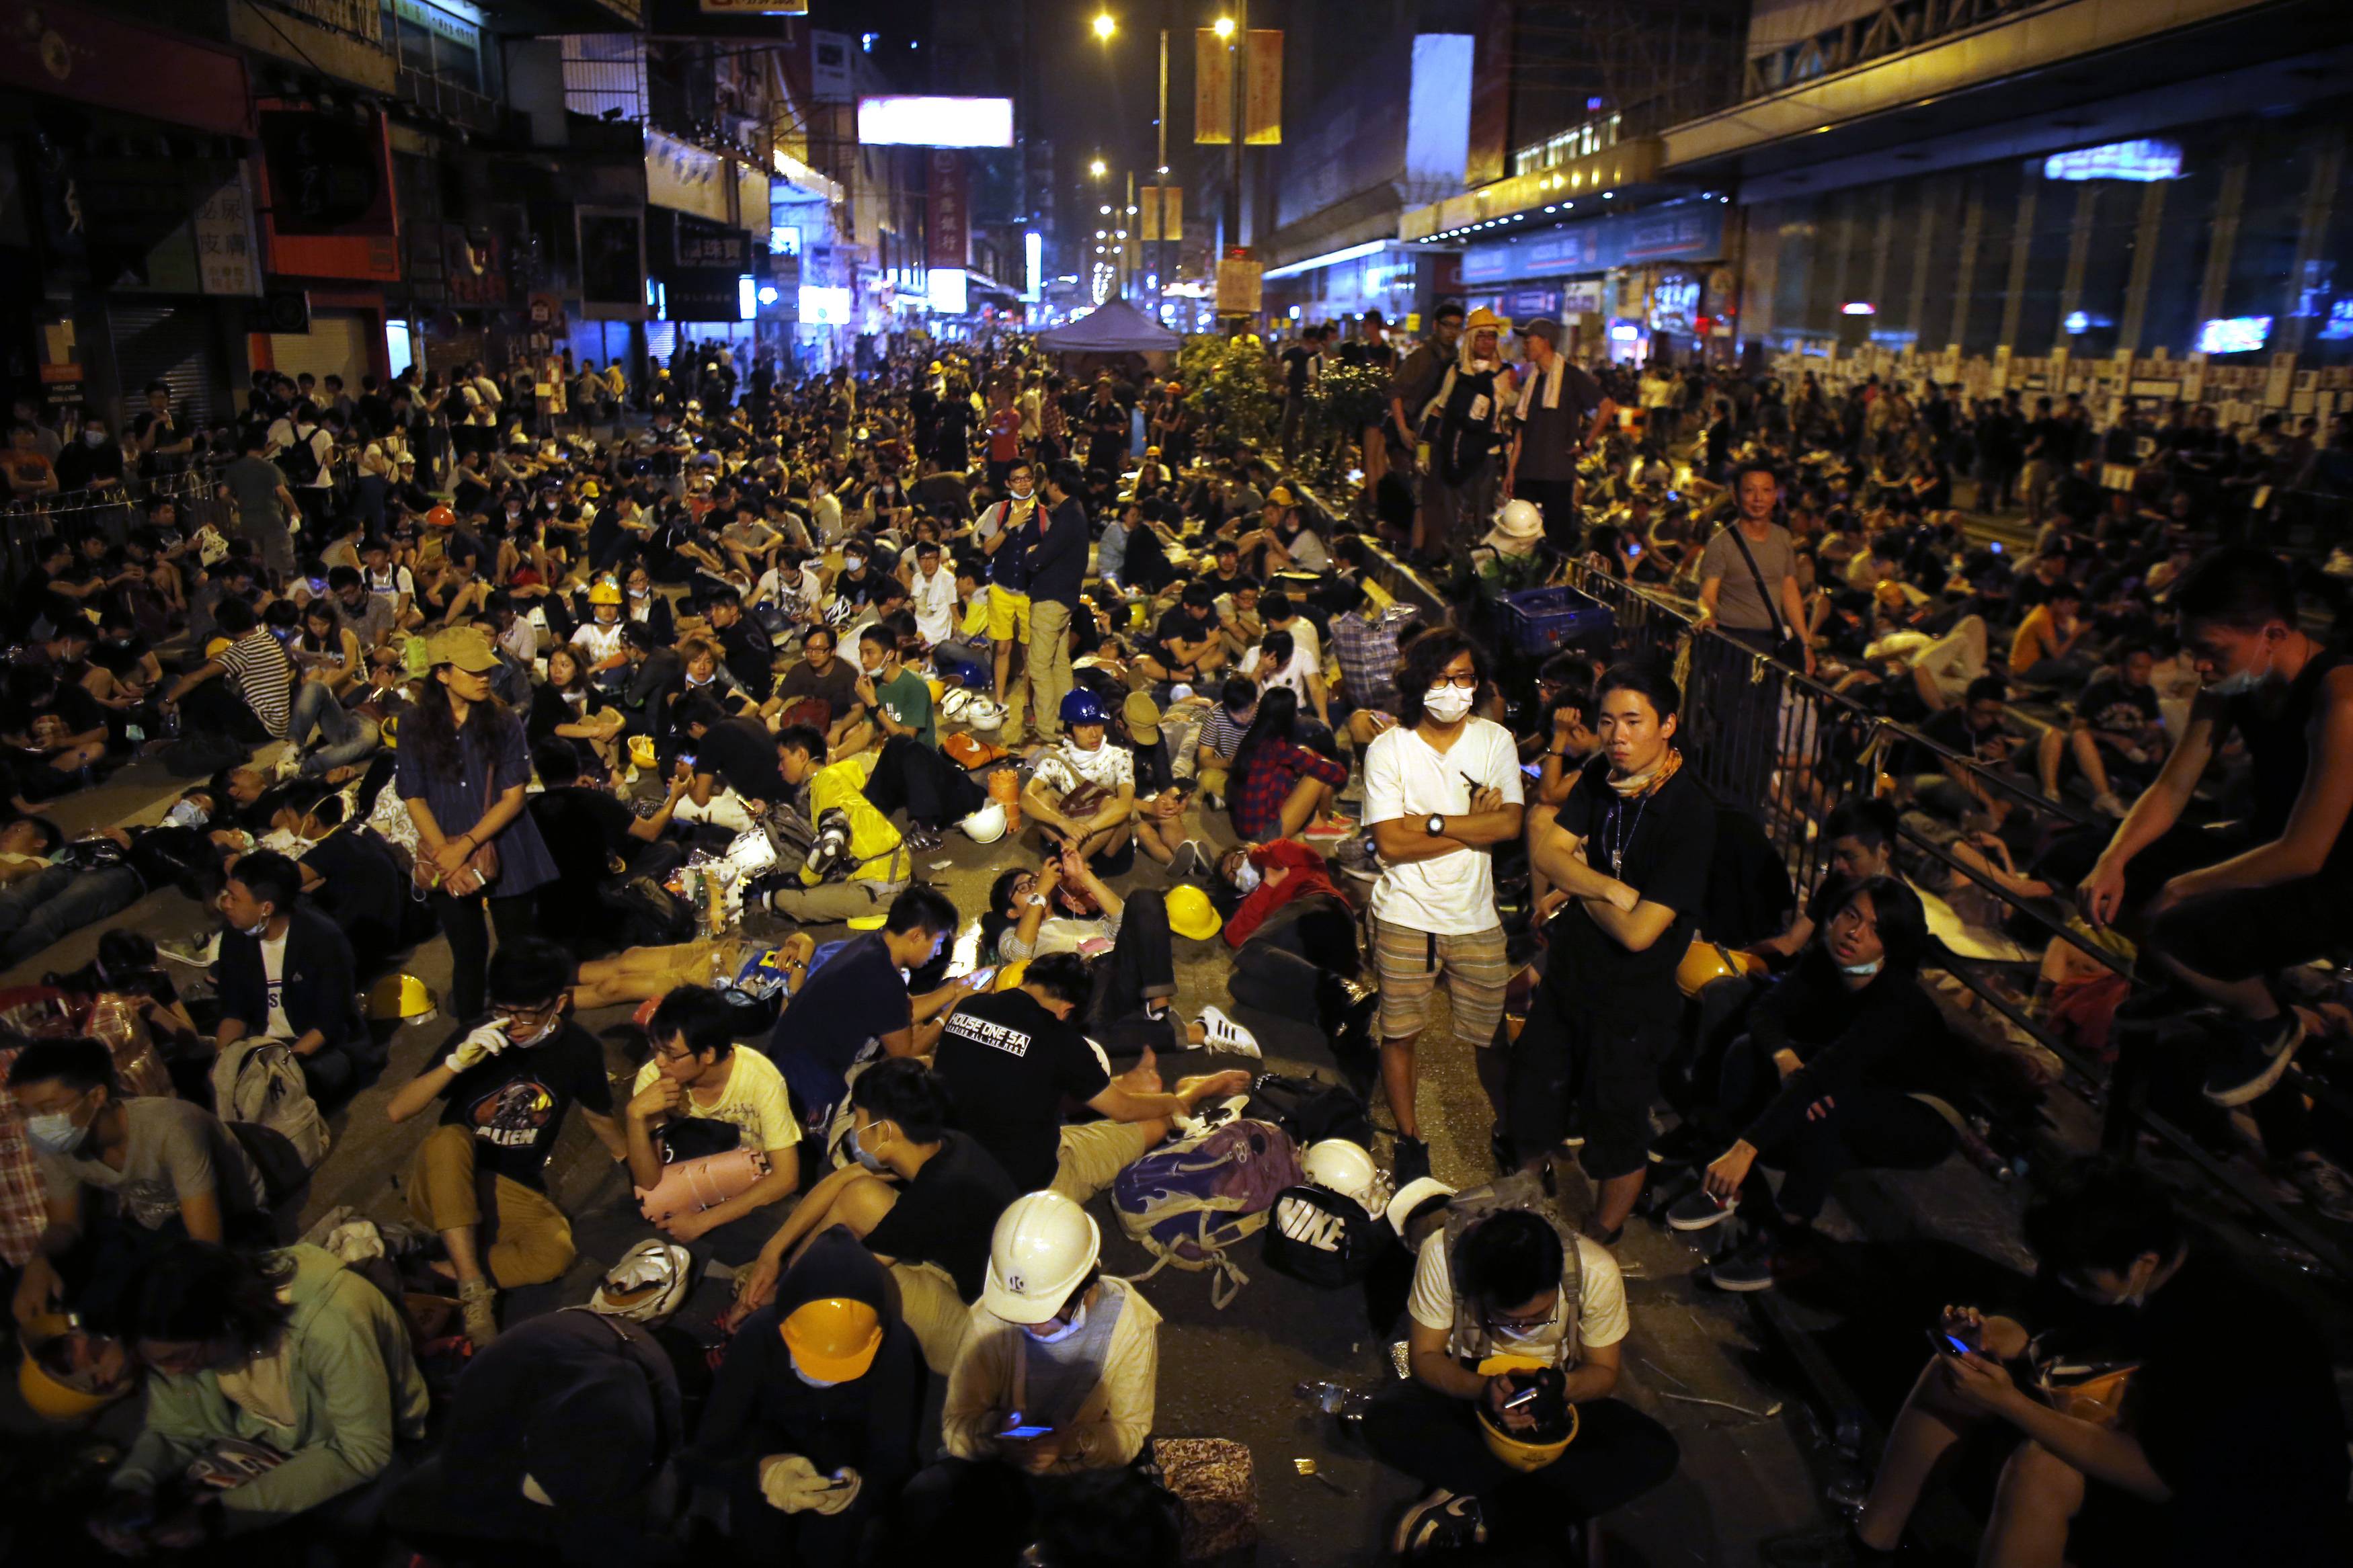 Hong Kong Crisis Deepens After Weekend Clashes, Talks Set for Tuesday